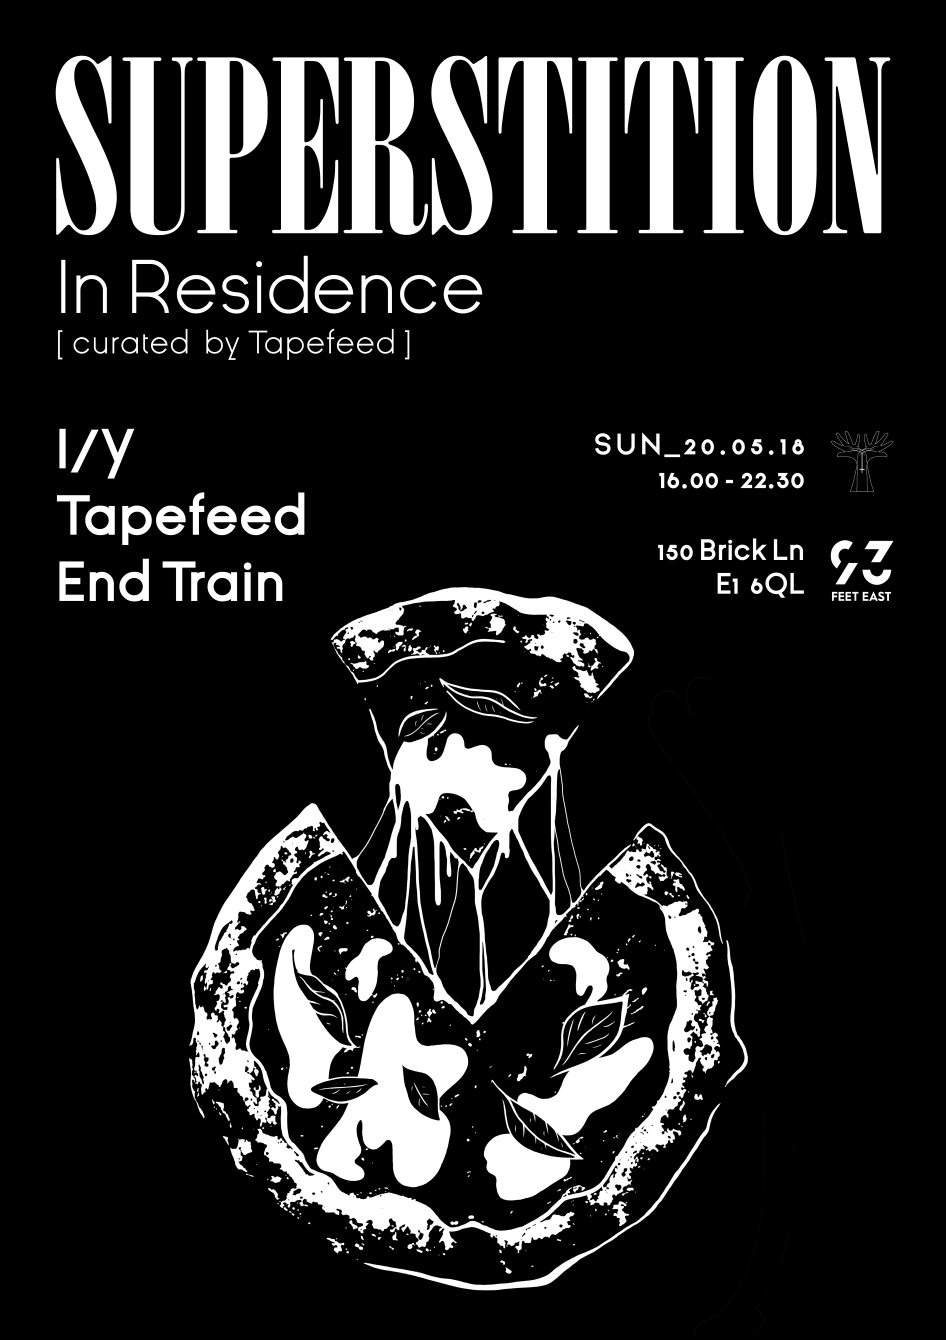 Superstition in Residence: I/Y, Tapefeed, End Train - Página trasera